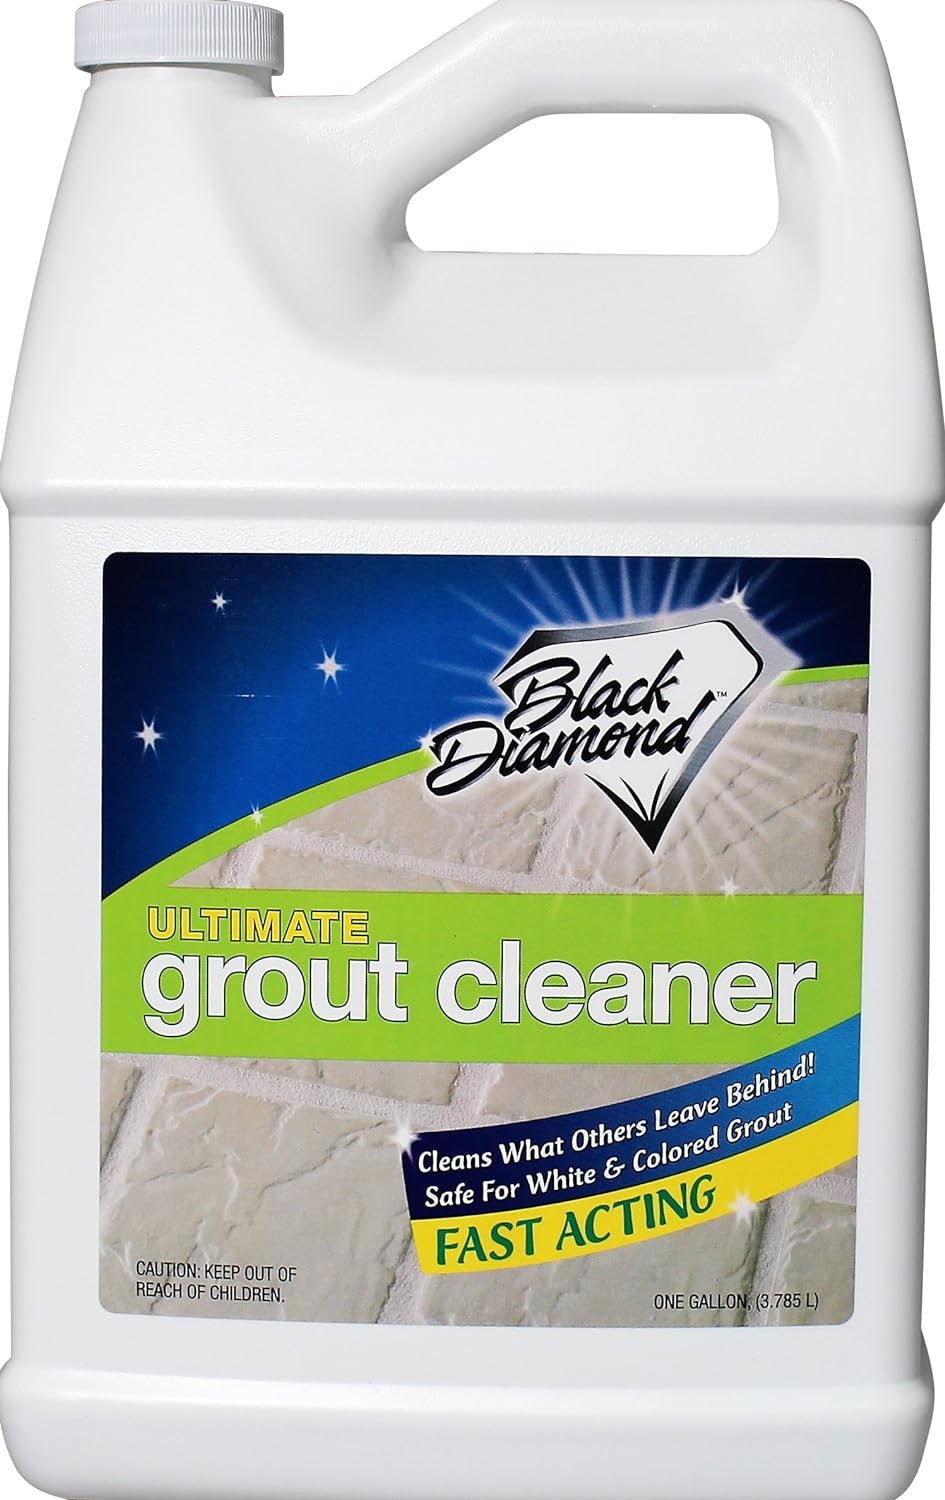 Ultimate Grout Cleaner: Best Grout Cleaner for Tile and Grout Cleaning, Acid-Free Safe Deep Cleaner & Stain Remover for Even The Dirtiest Grout, Best Way to Clean Grout in Ceramic, Marble. Gallon